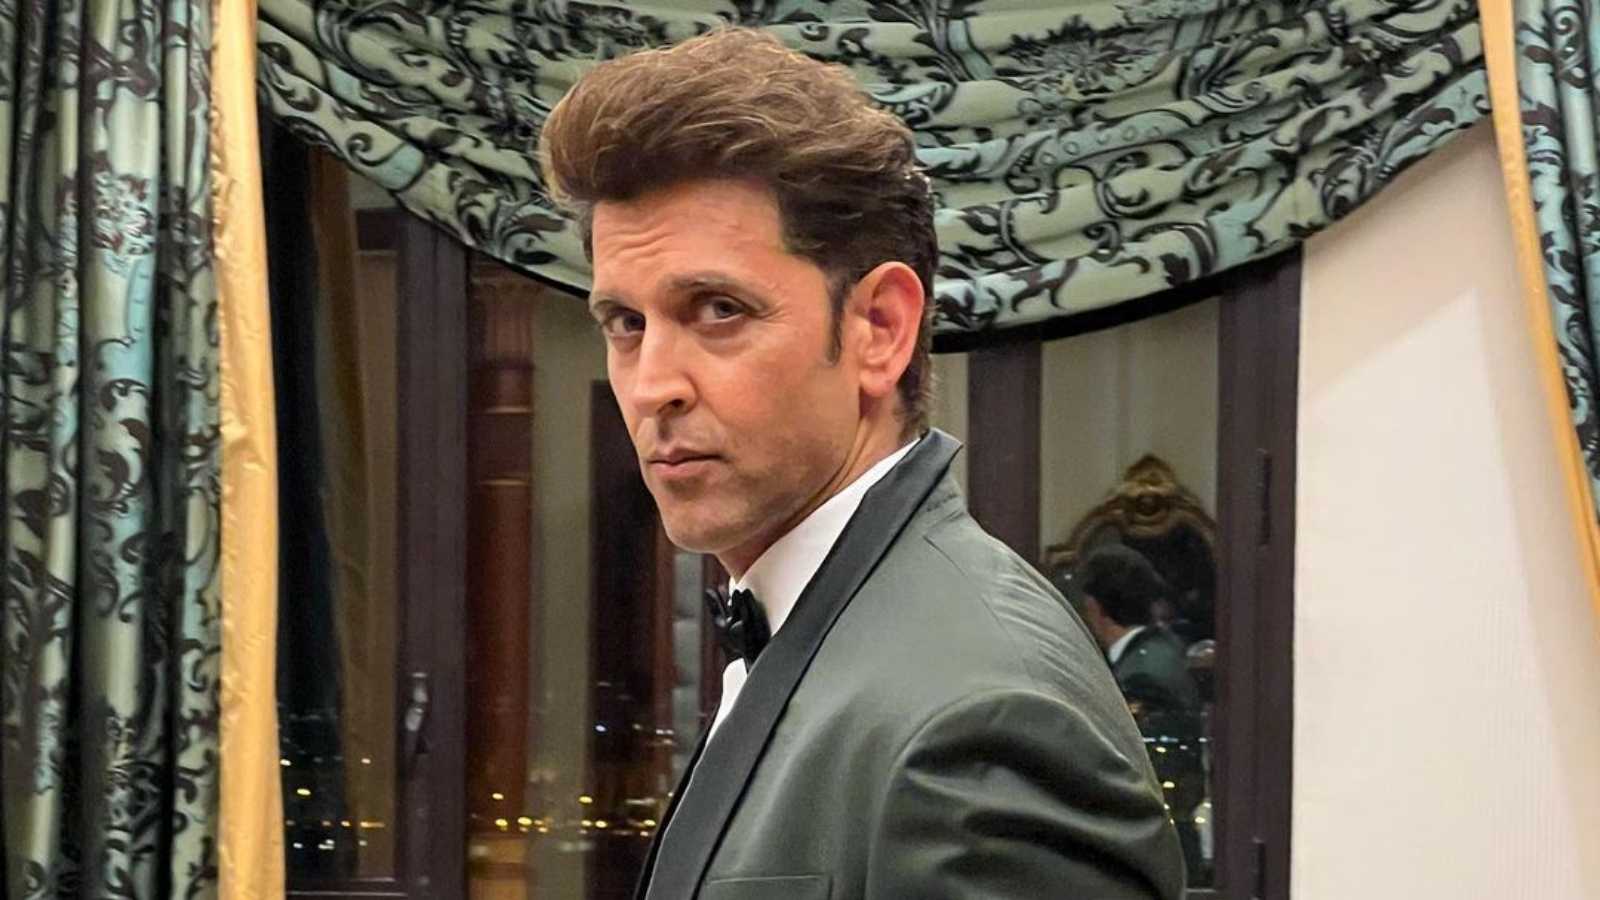 Hrithik Roshan's fans want to see him as the next James Bond, these pictures of the 'Greek god' have them convinced he's meant for it